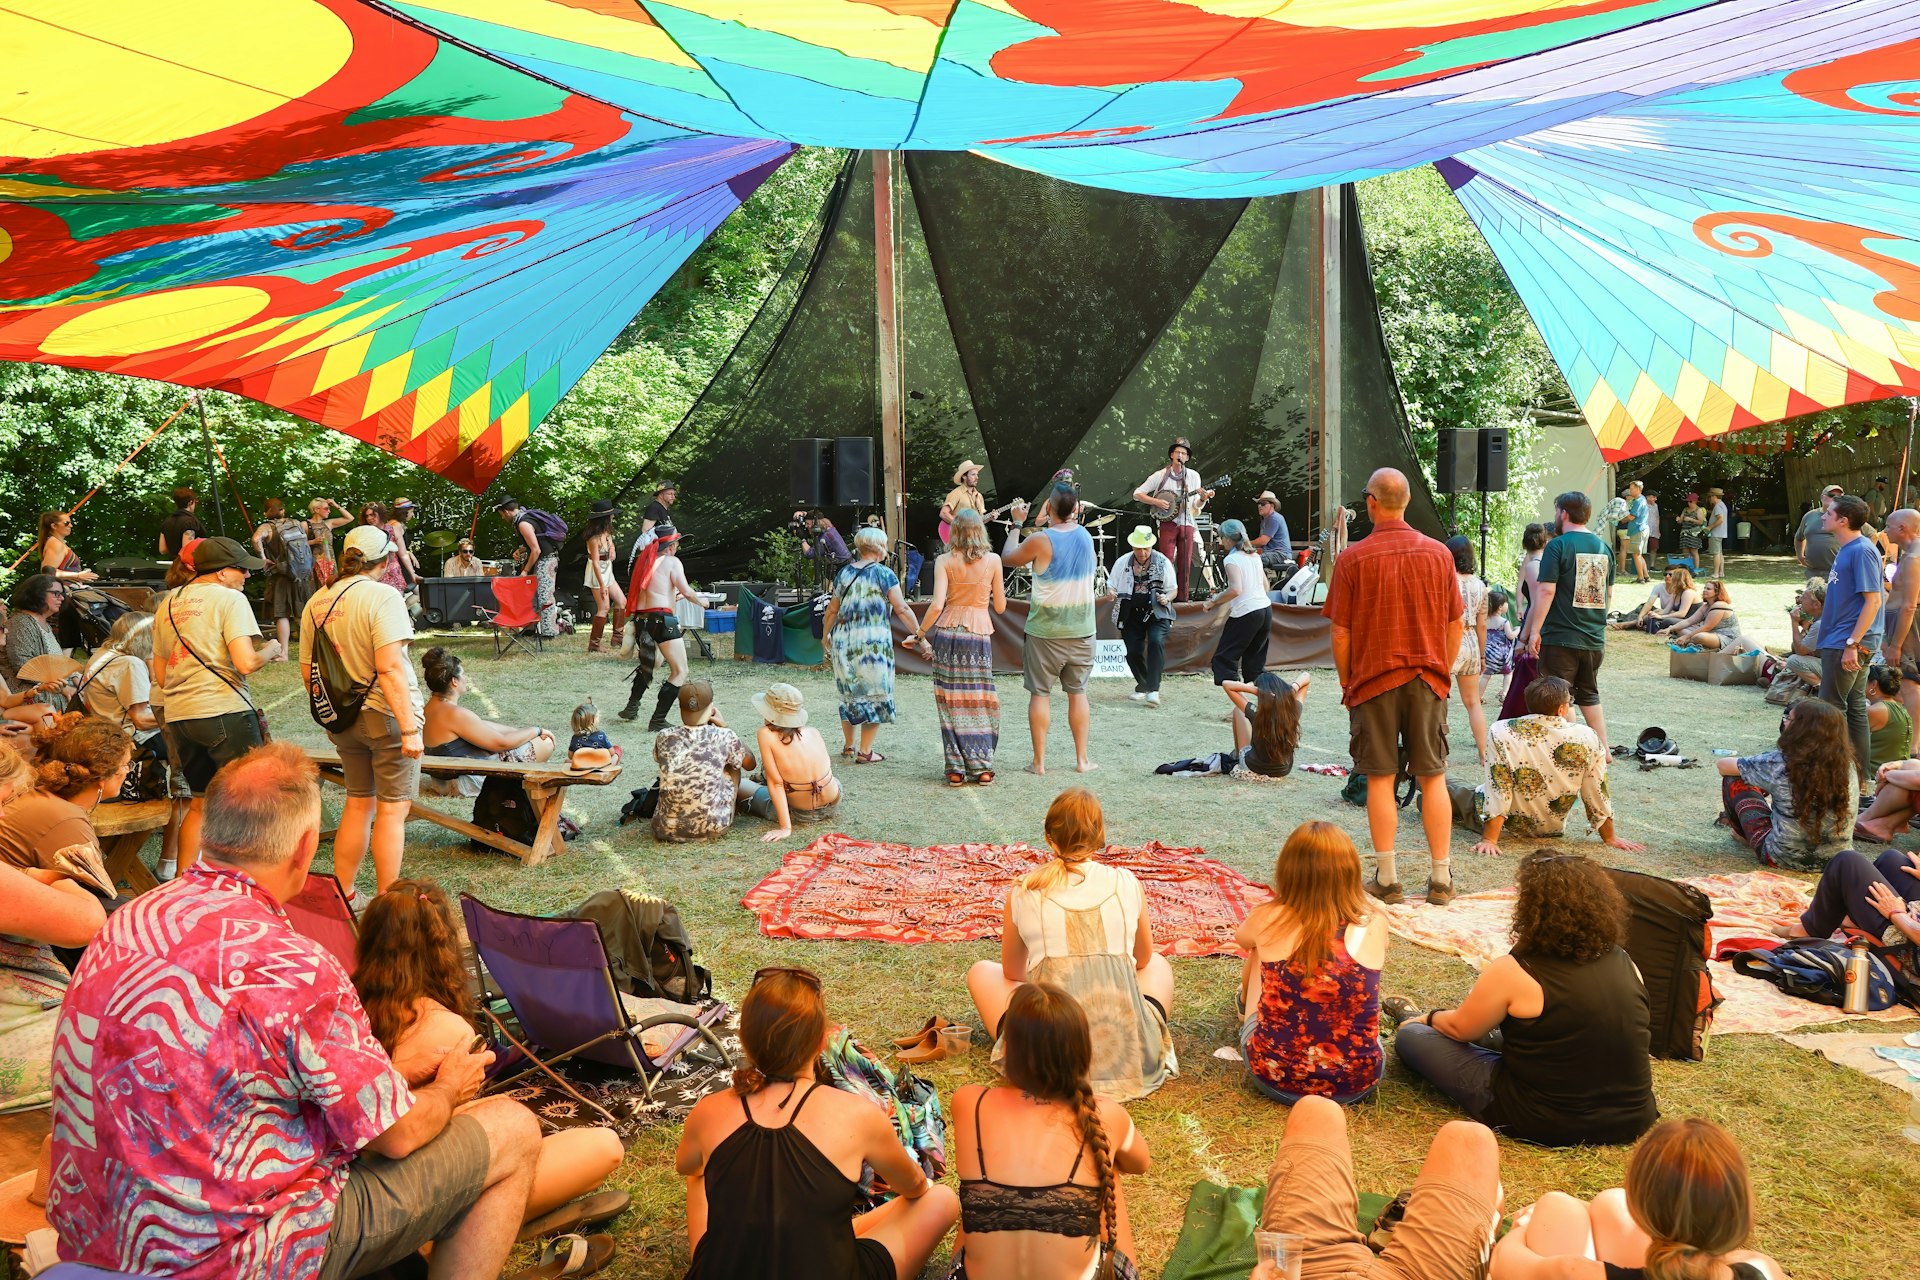 Adults and children sit under a colorful tie-dyed canopy watching a musician perform on a sunny day